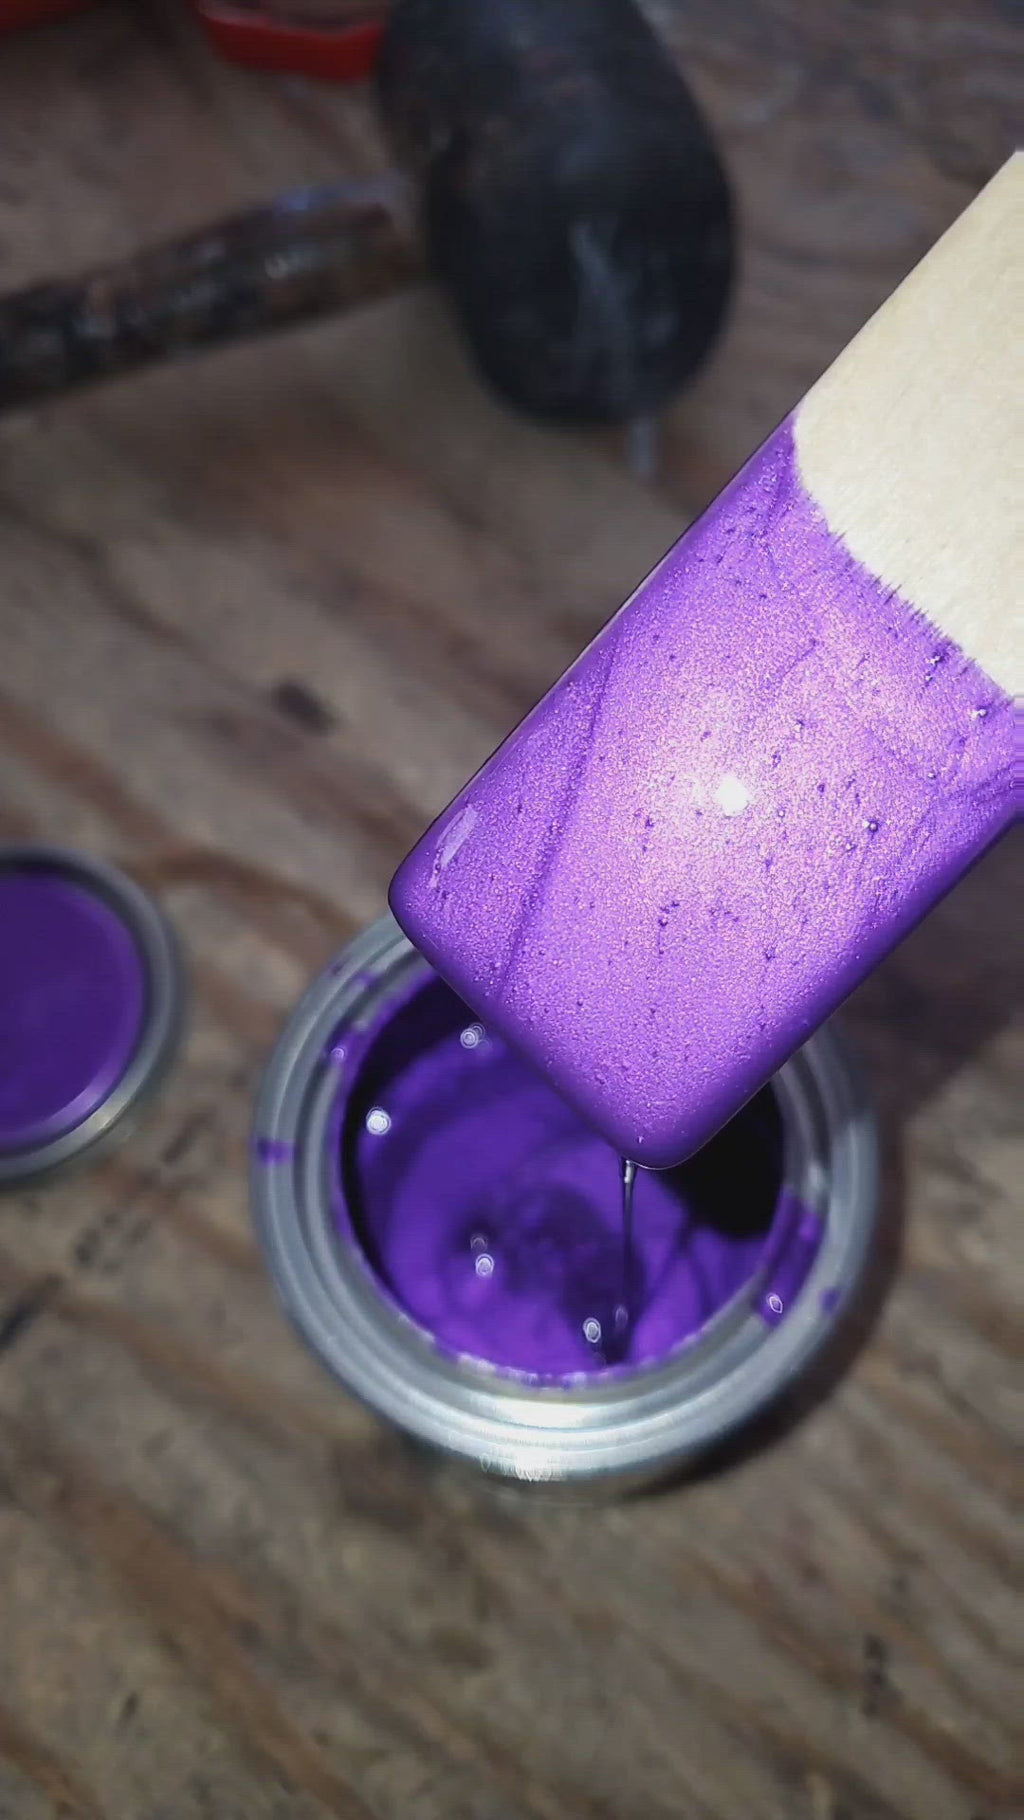 Purple Reign  Tamco Paint Products